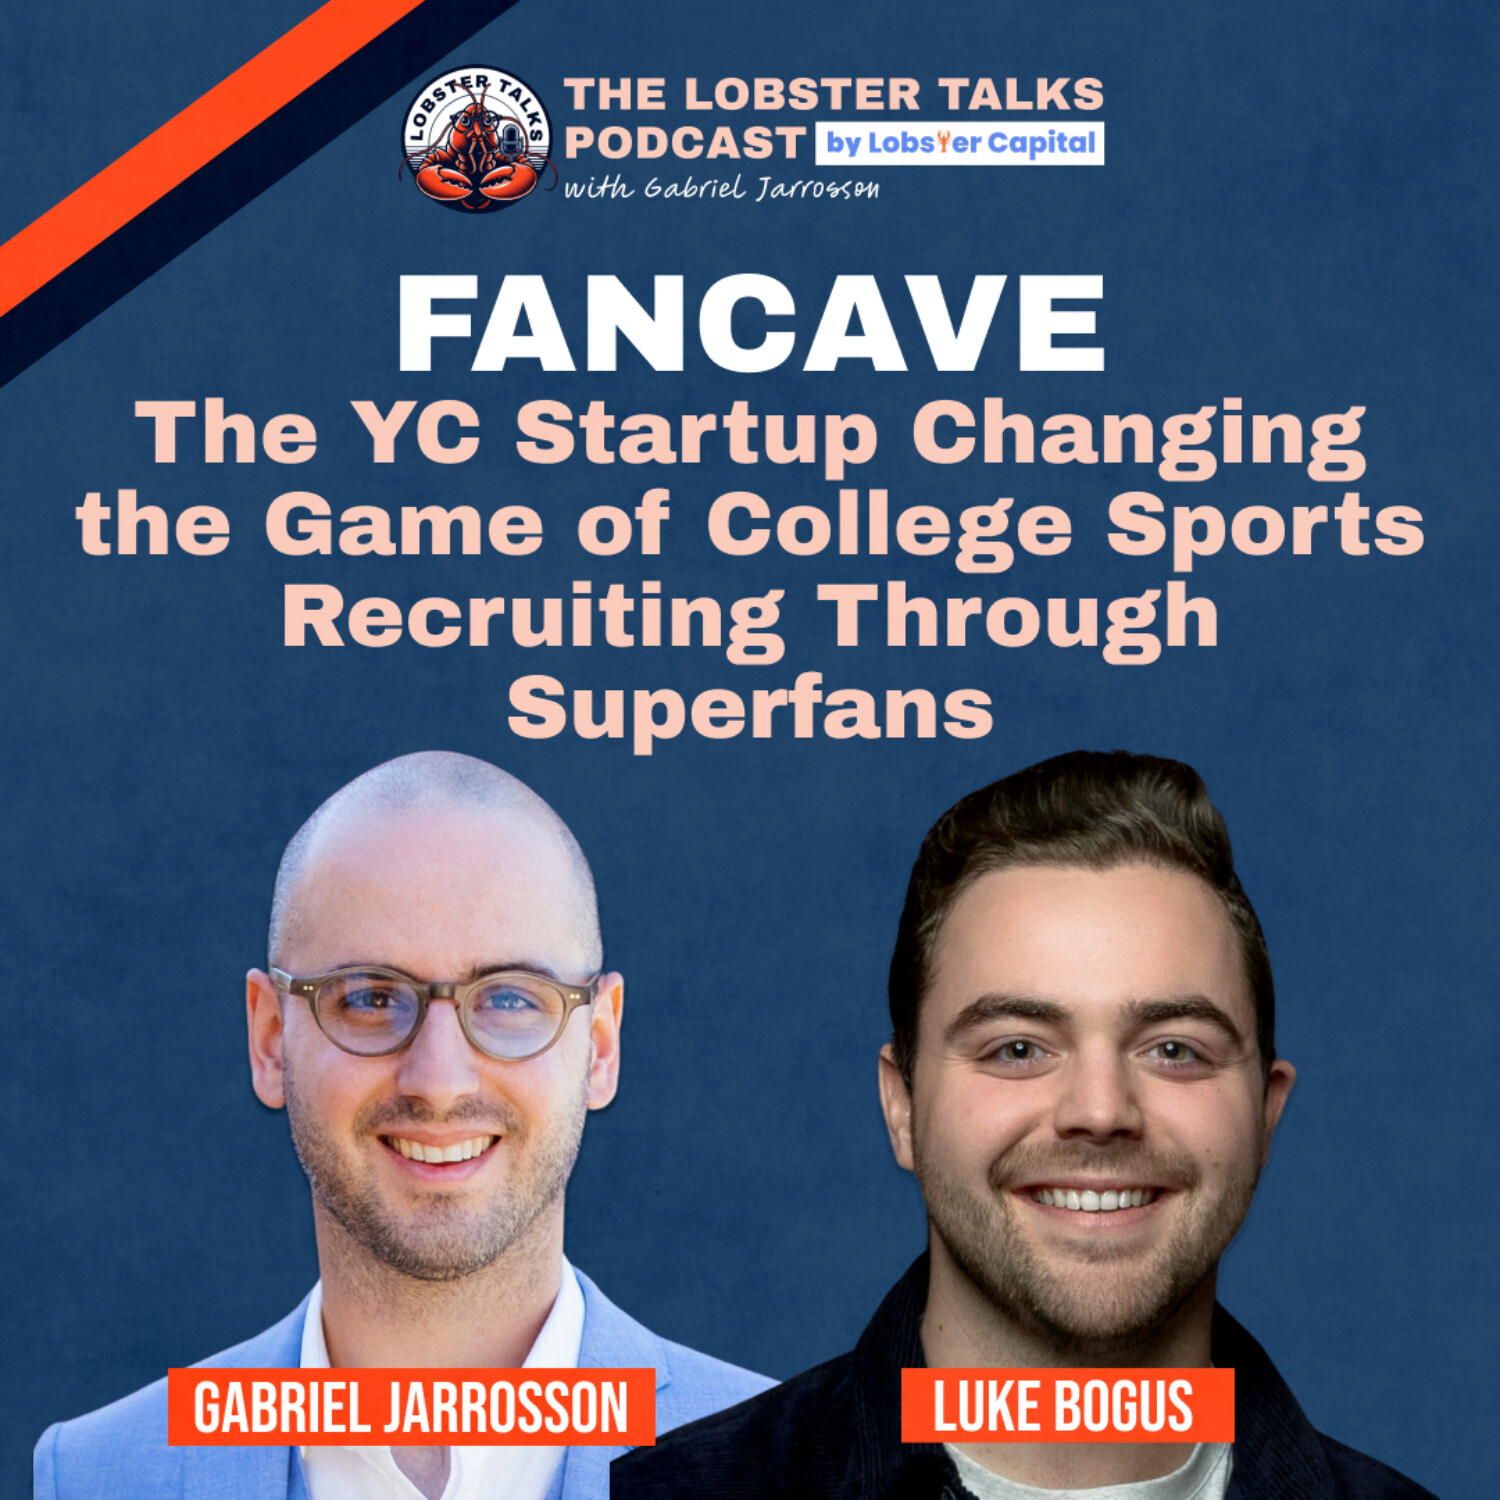 FanCave: The YC Startup Changing the Game of College Sports Recruiting Through Superfans